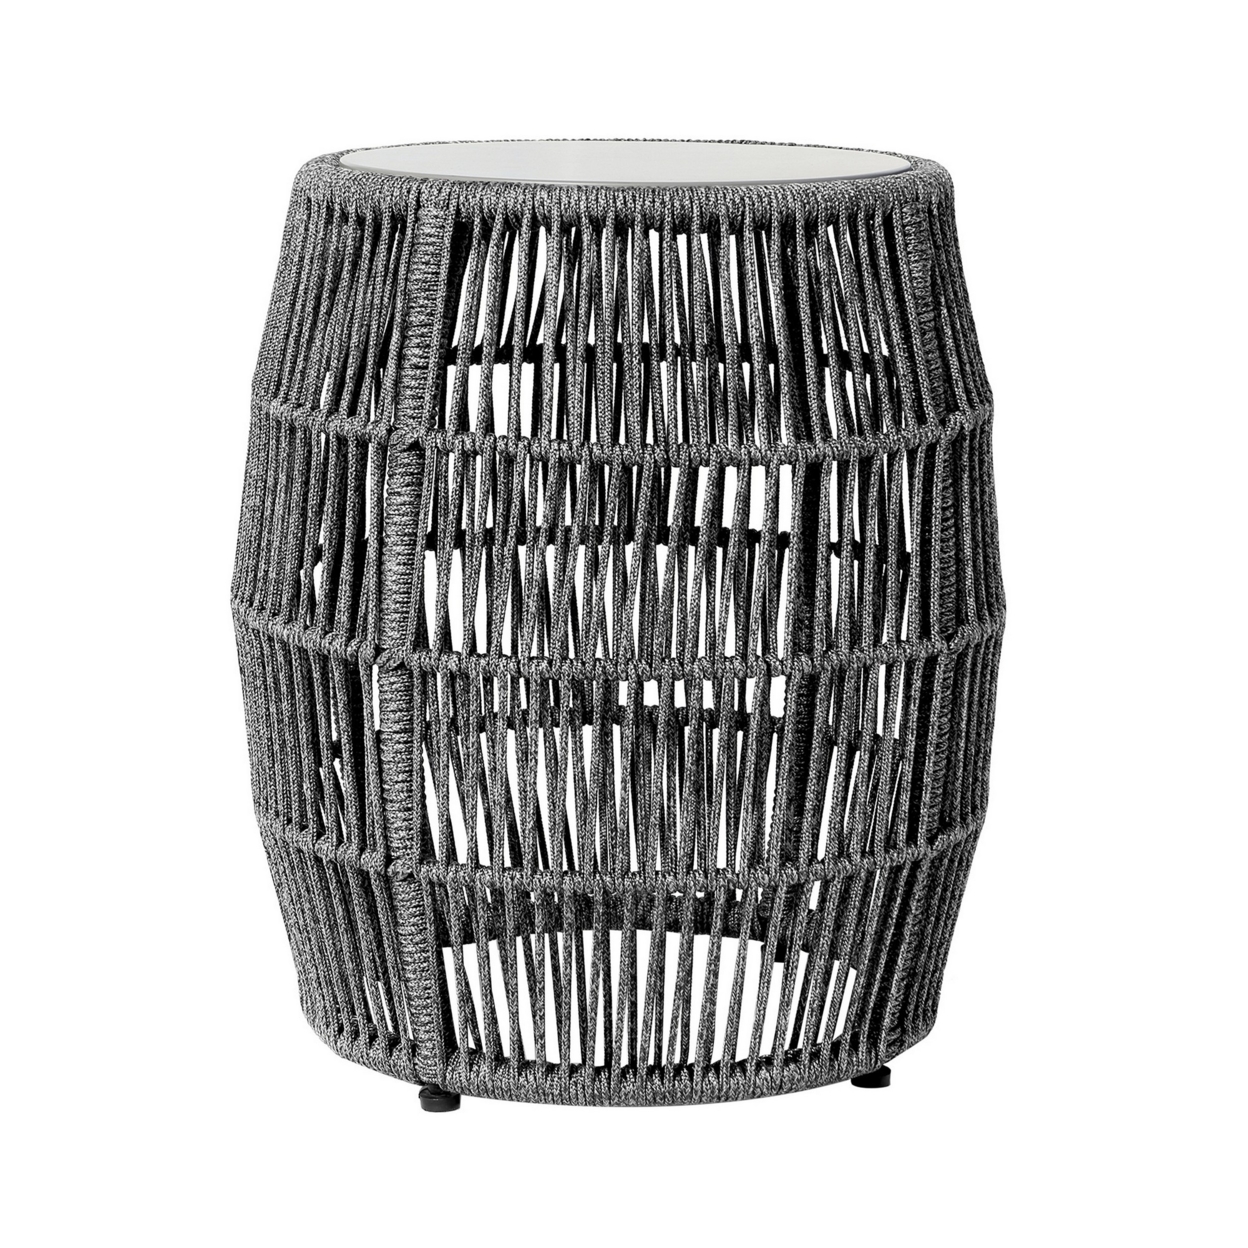 Gip 22 Inch Indoor Outdoor End Table Stool, Gray Round Stone Top, Woven Rope- Saltoro Sherpi